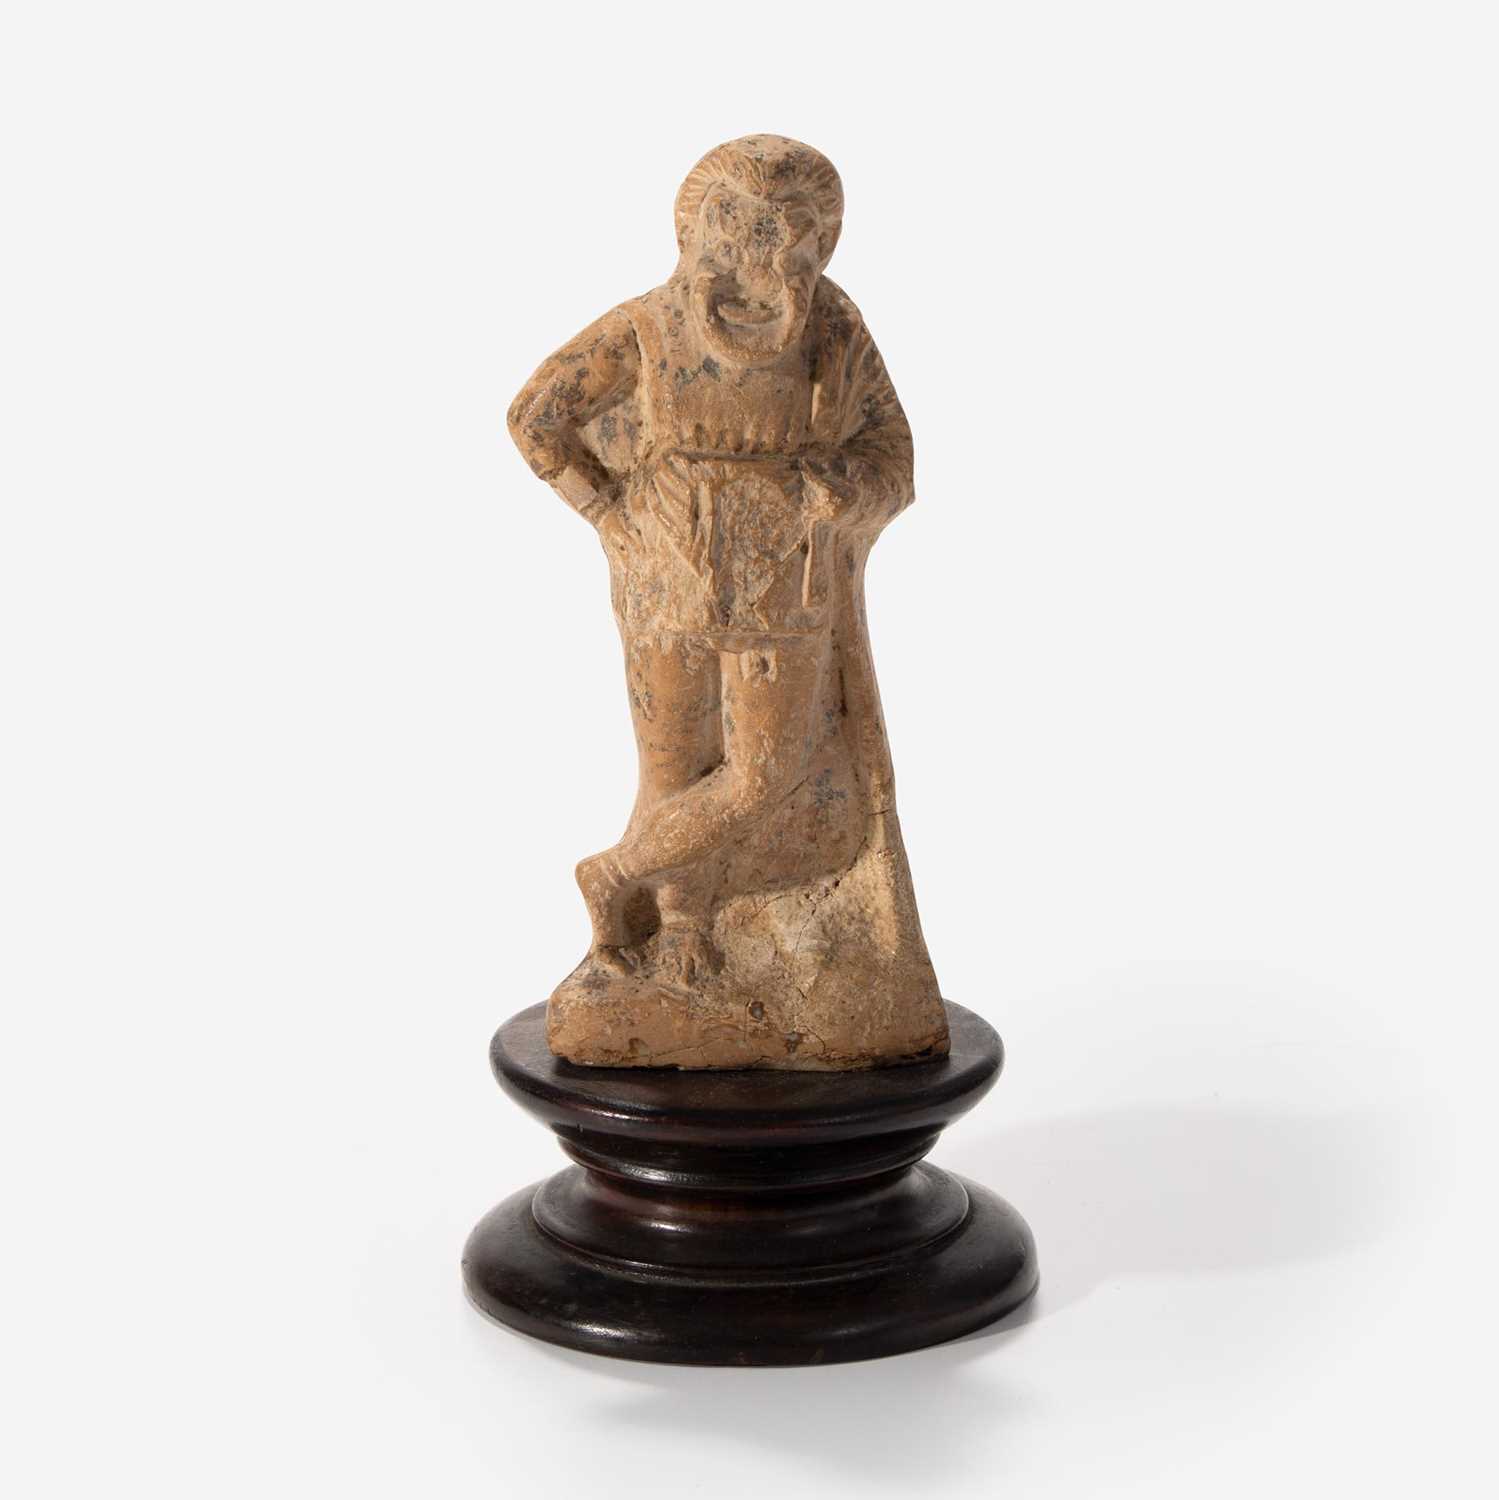 Lot 8 - An Ancient Greek Terracotta Figurine of a Comic Actor